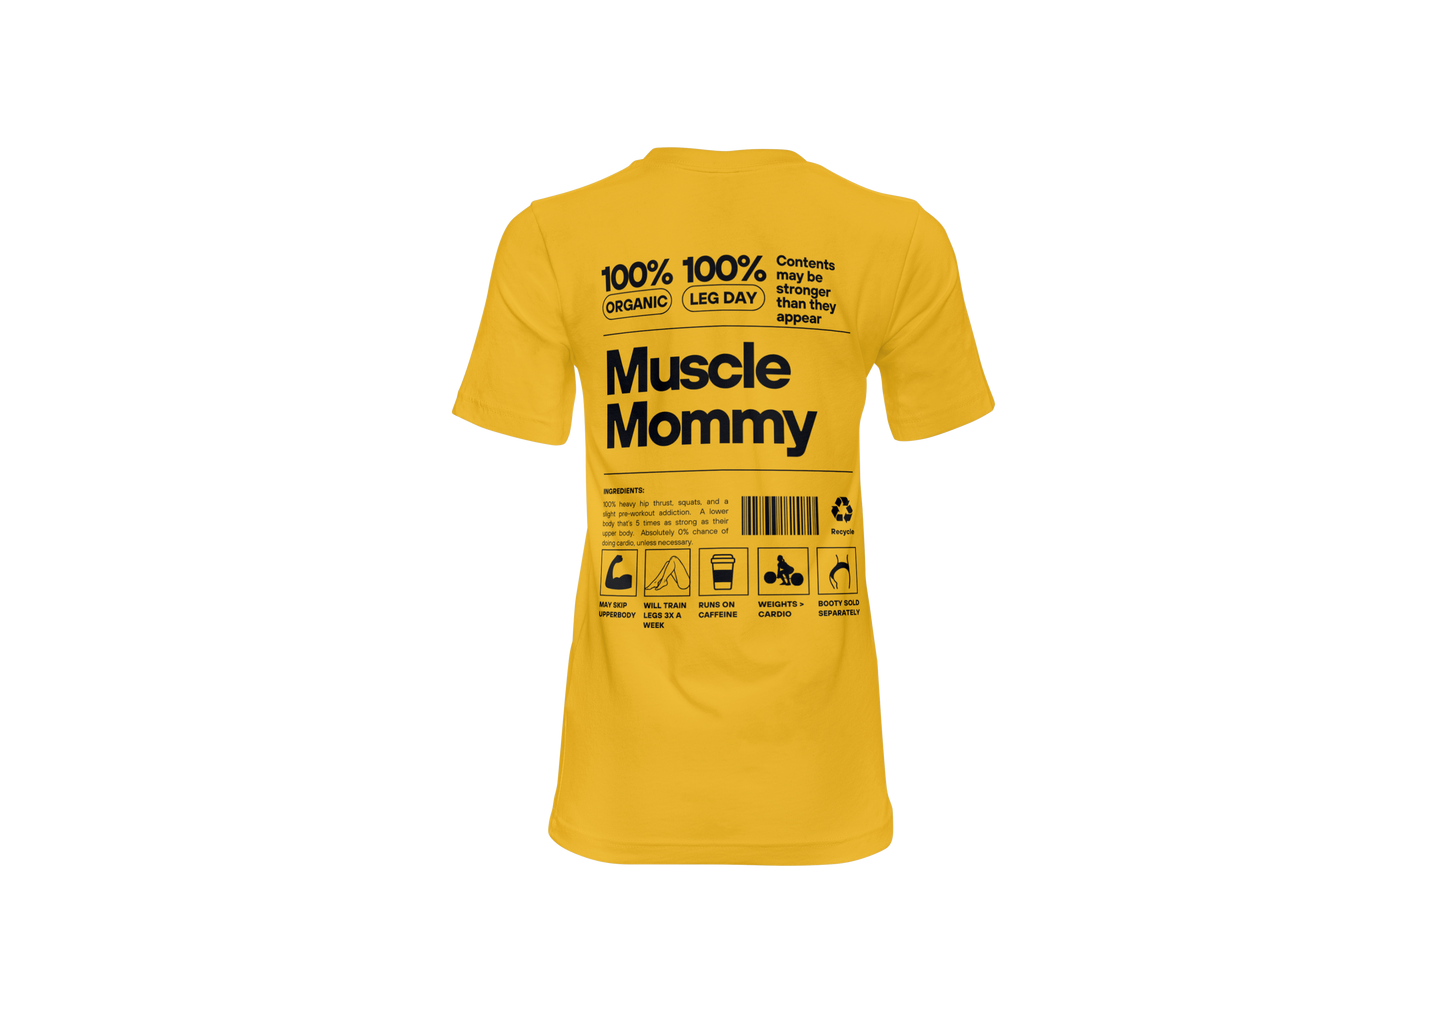 Muscle Mommy